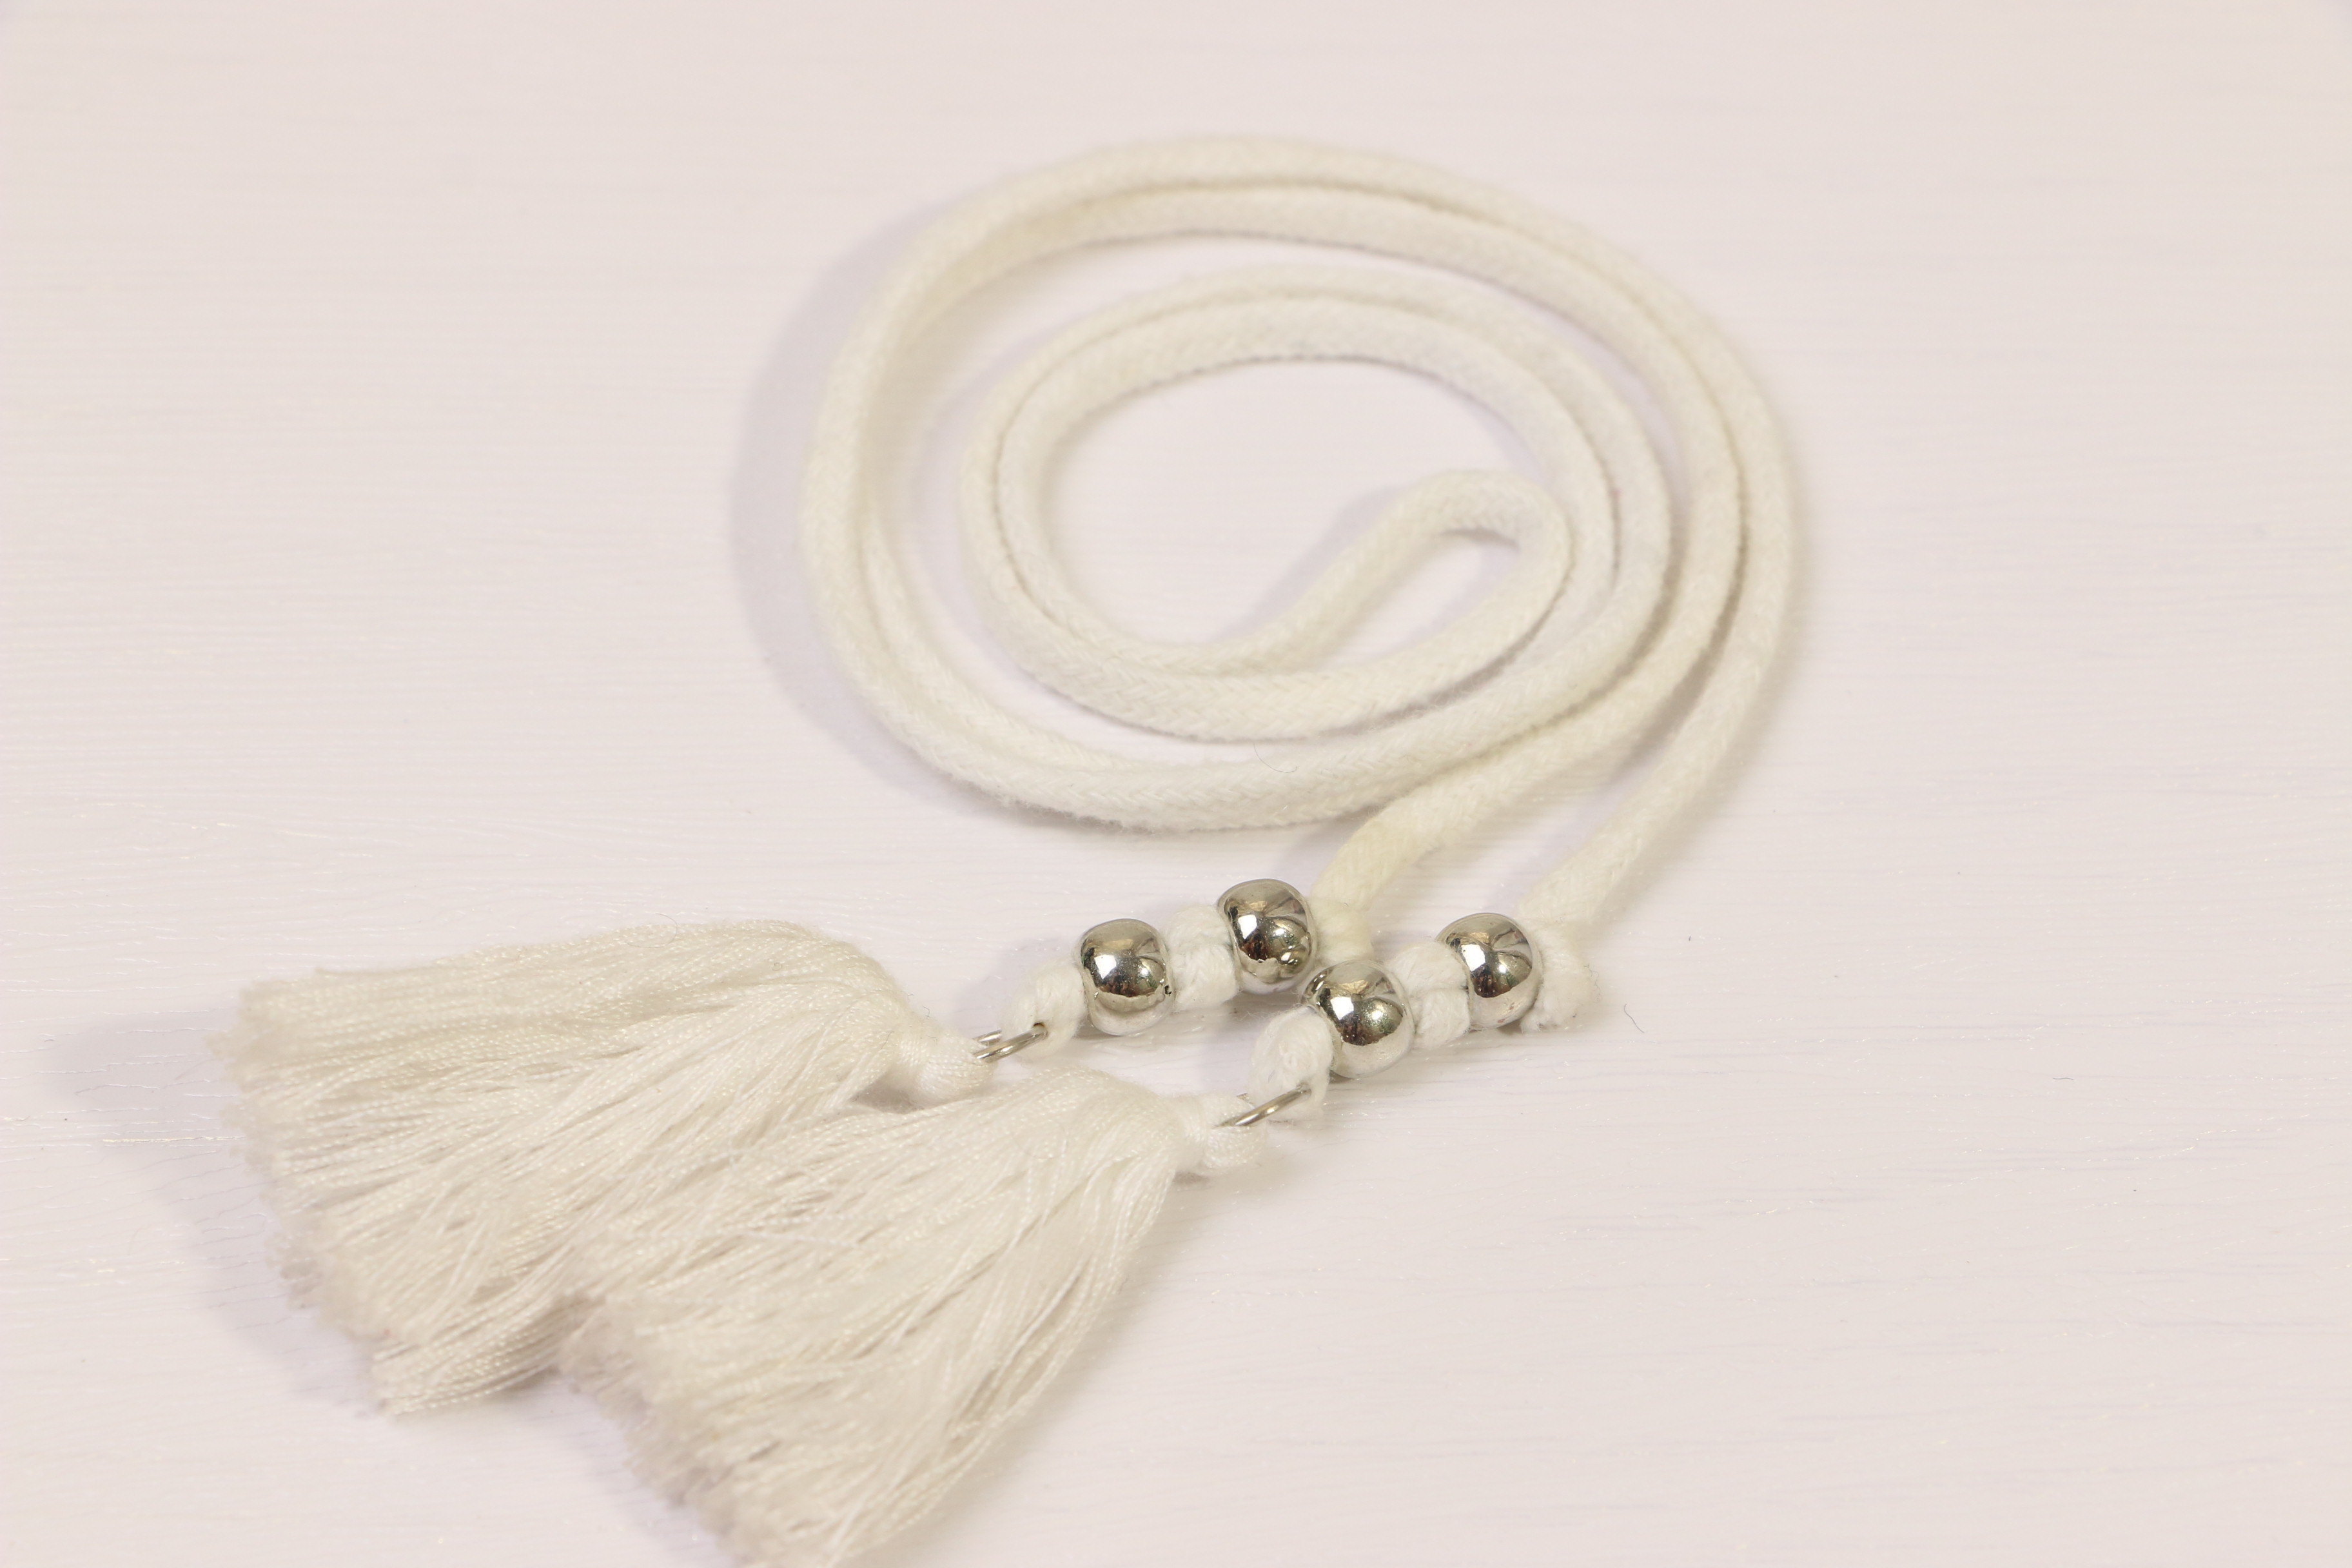  Cotton Drawcord String With Decorative Iron Ball 3.5mm Manufactures